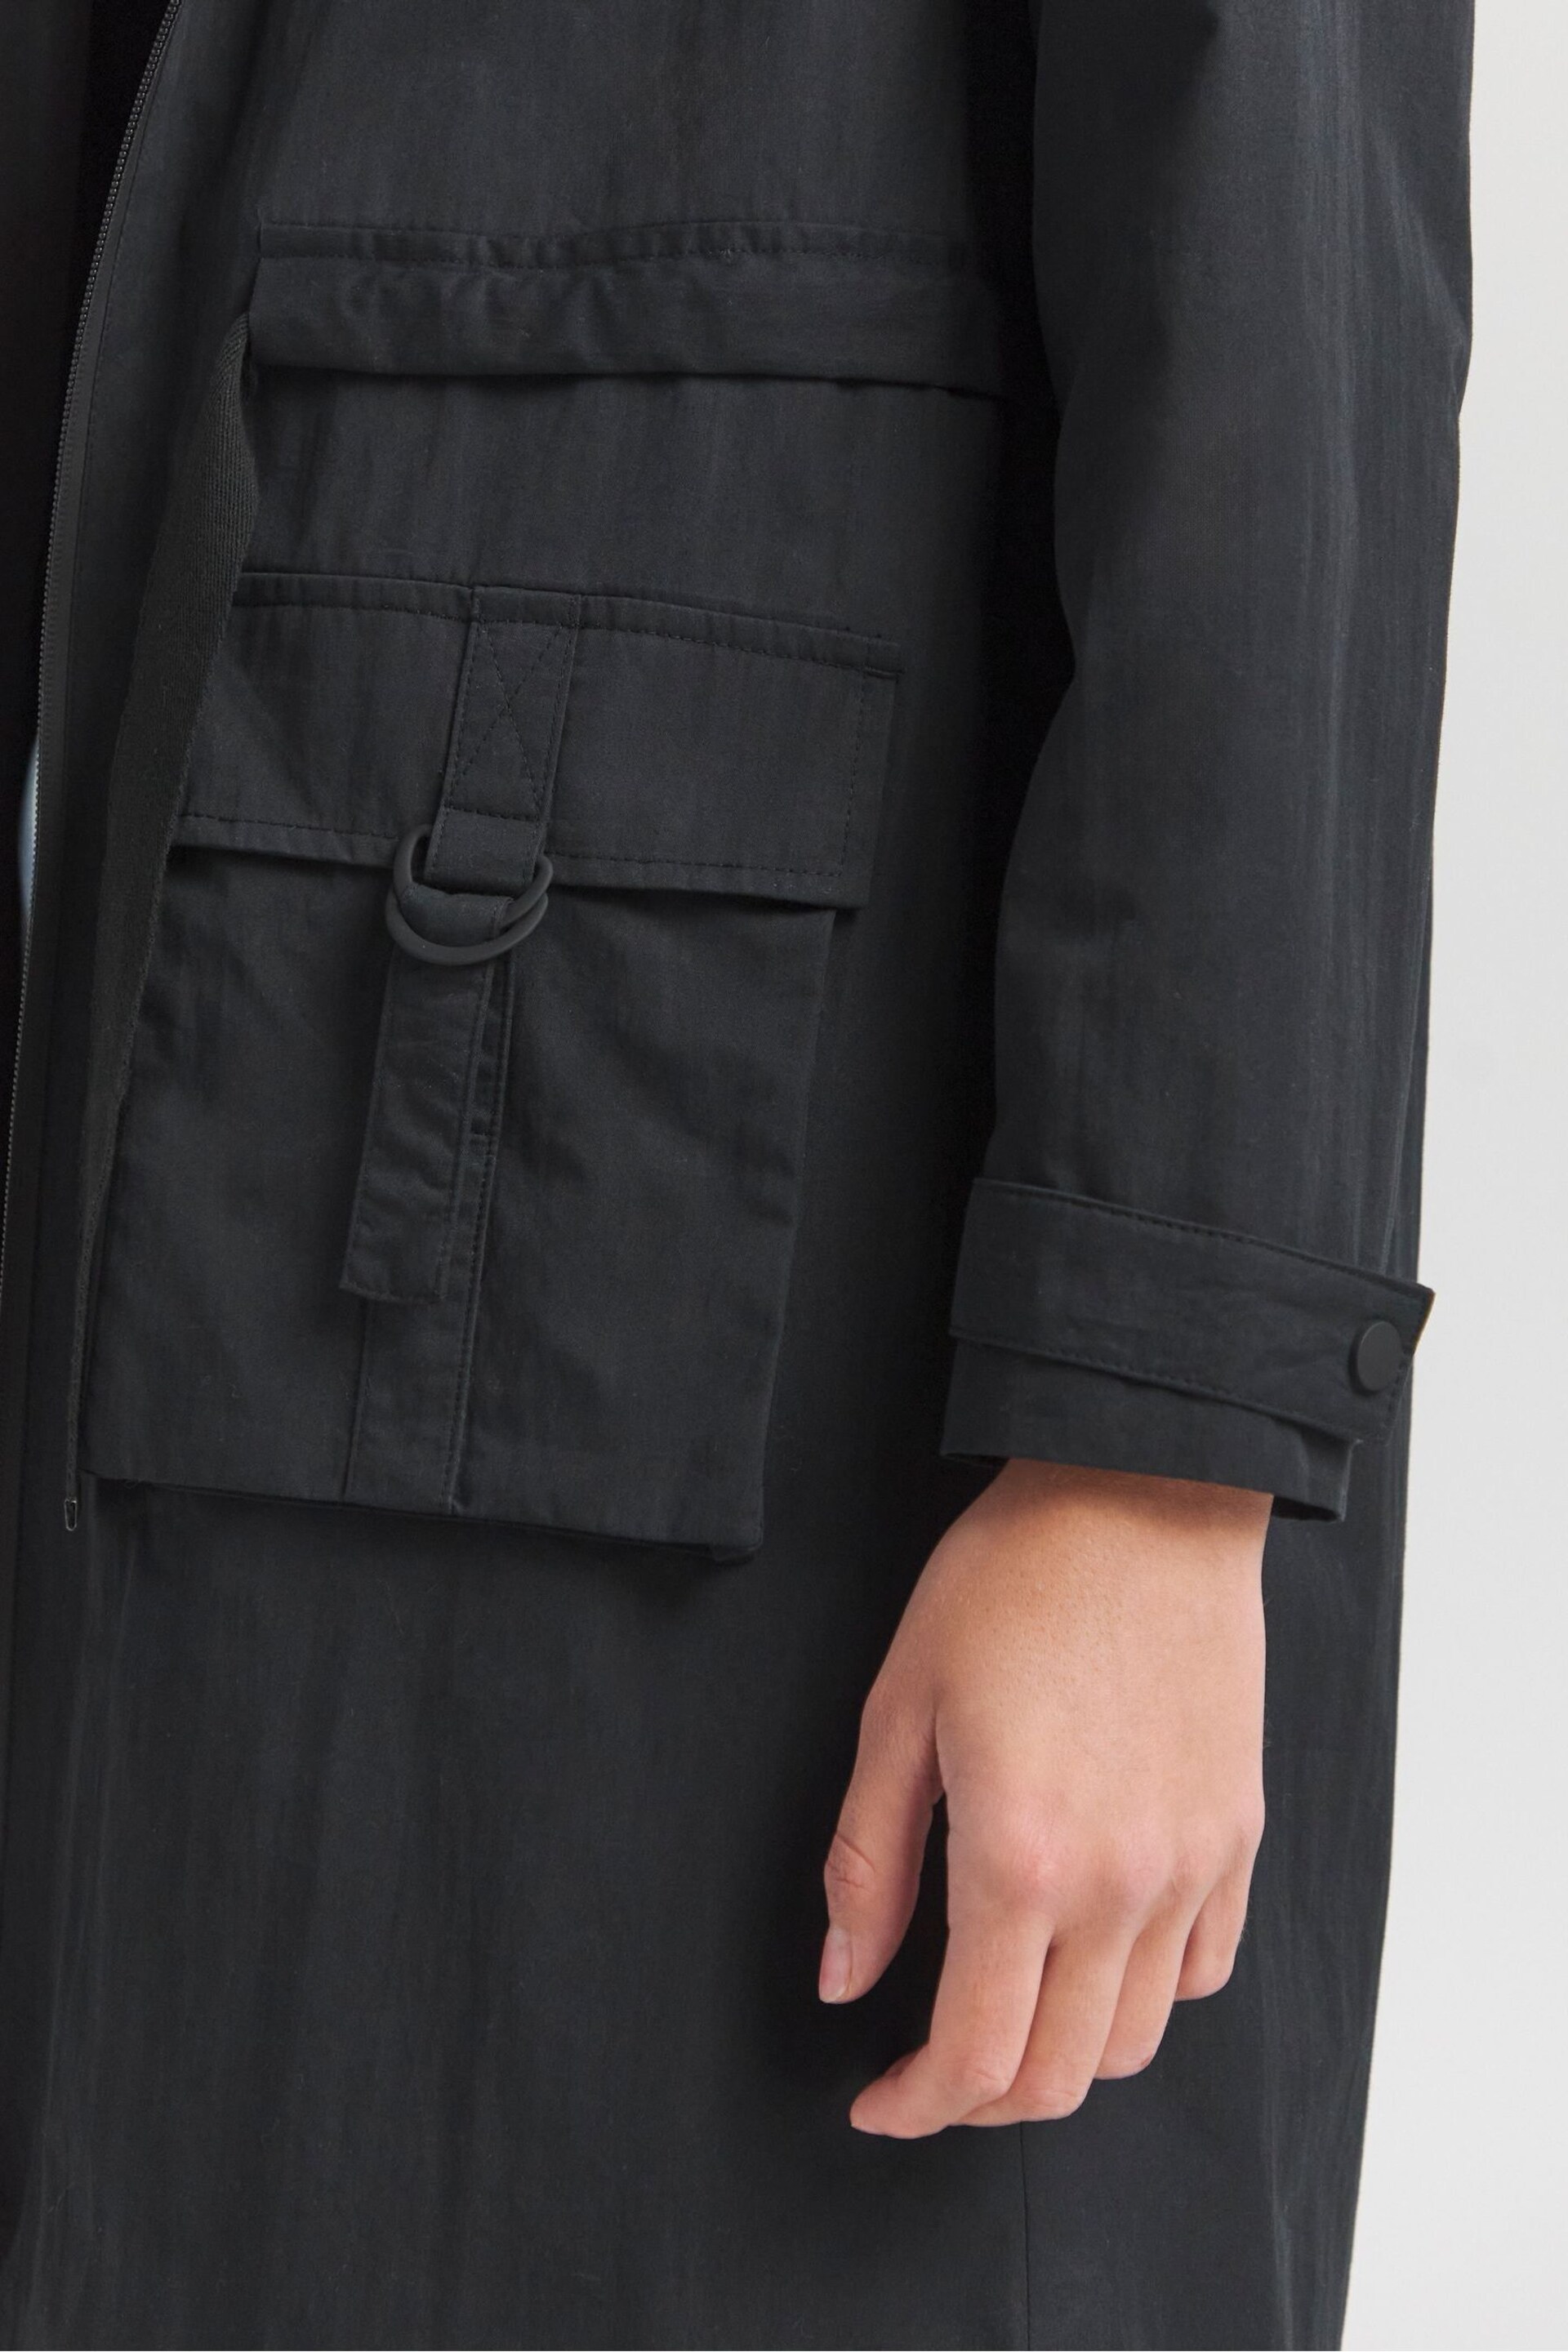 Simply Be Black Functional Utility Coat - Image 4 of 4